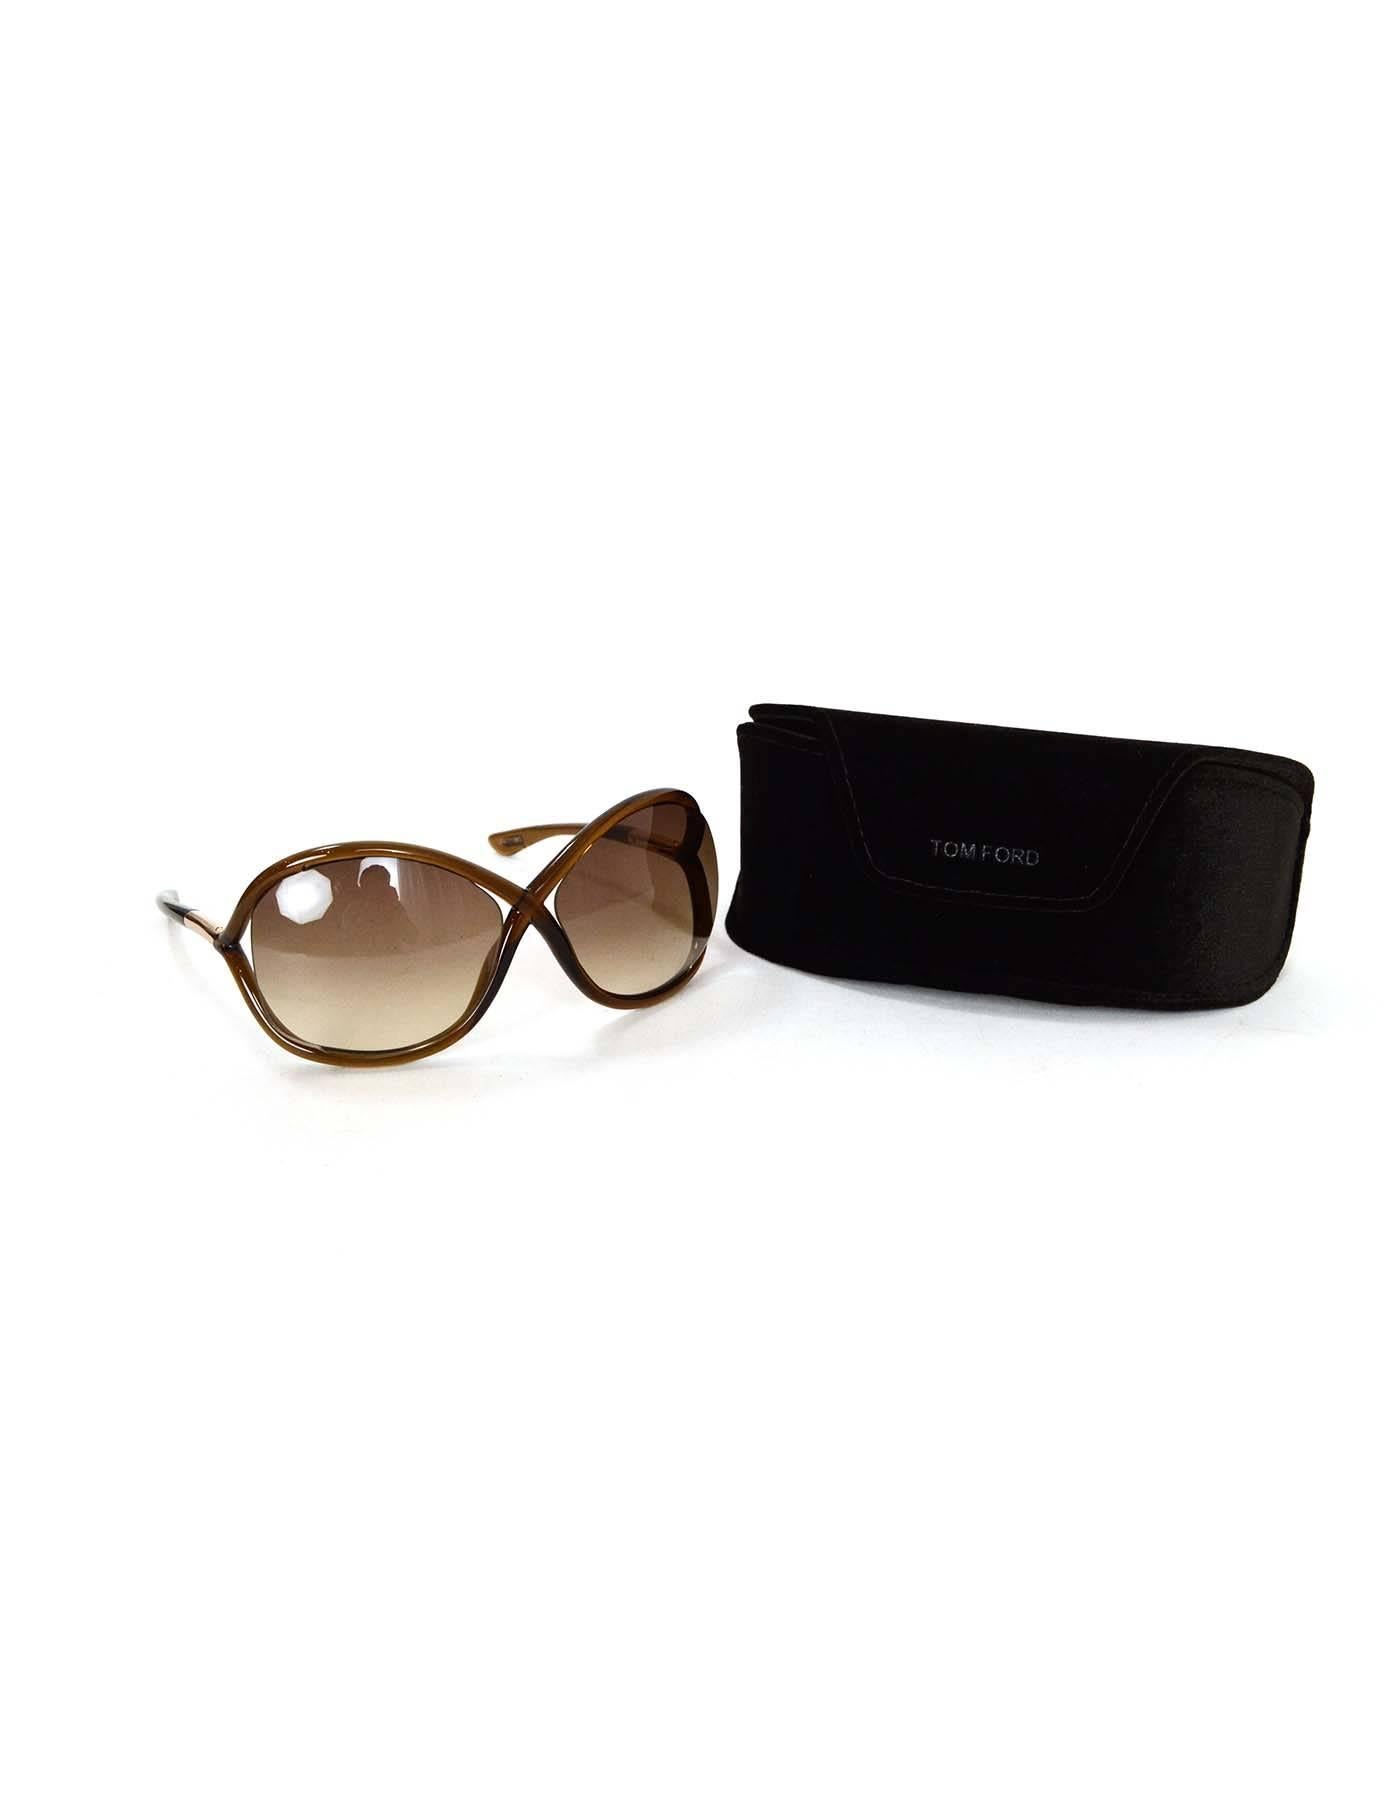 Tom Ford Brown Oversized 'Whitney' Sunglasses
Features 